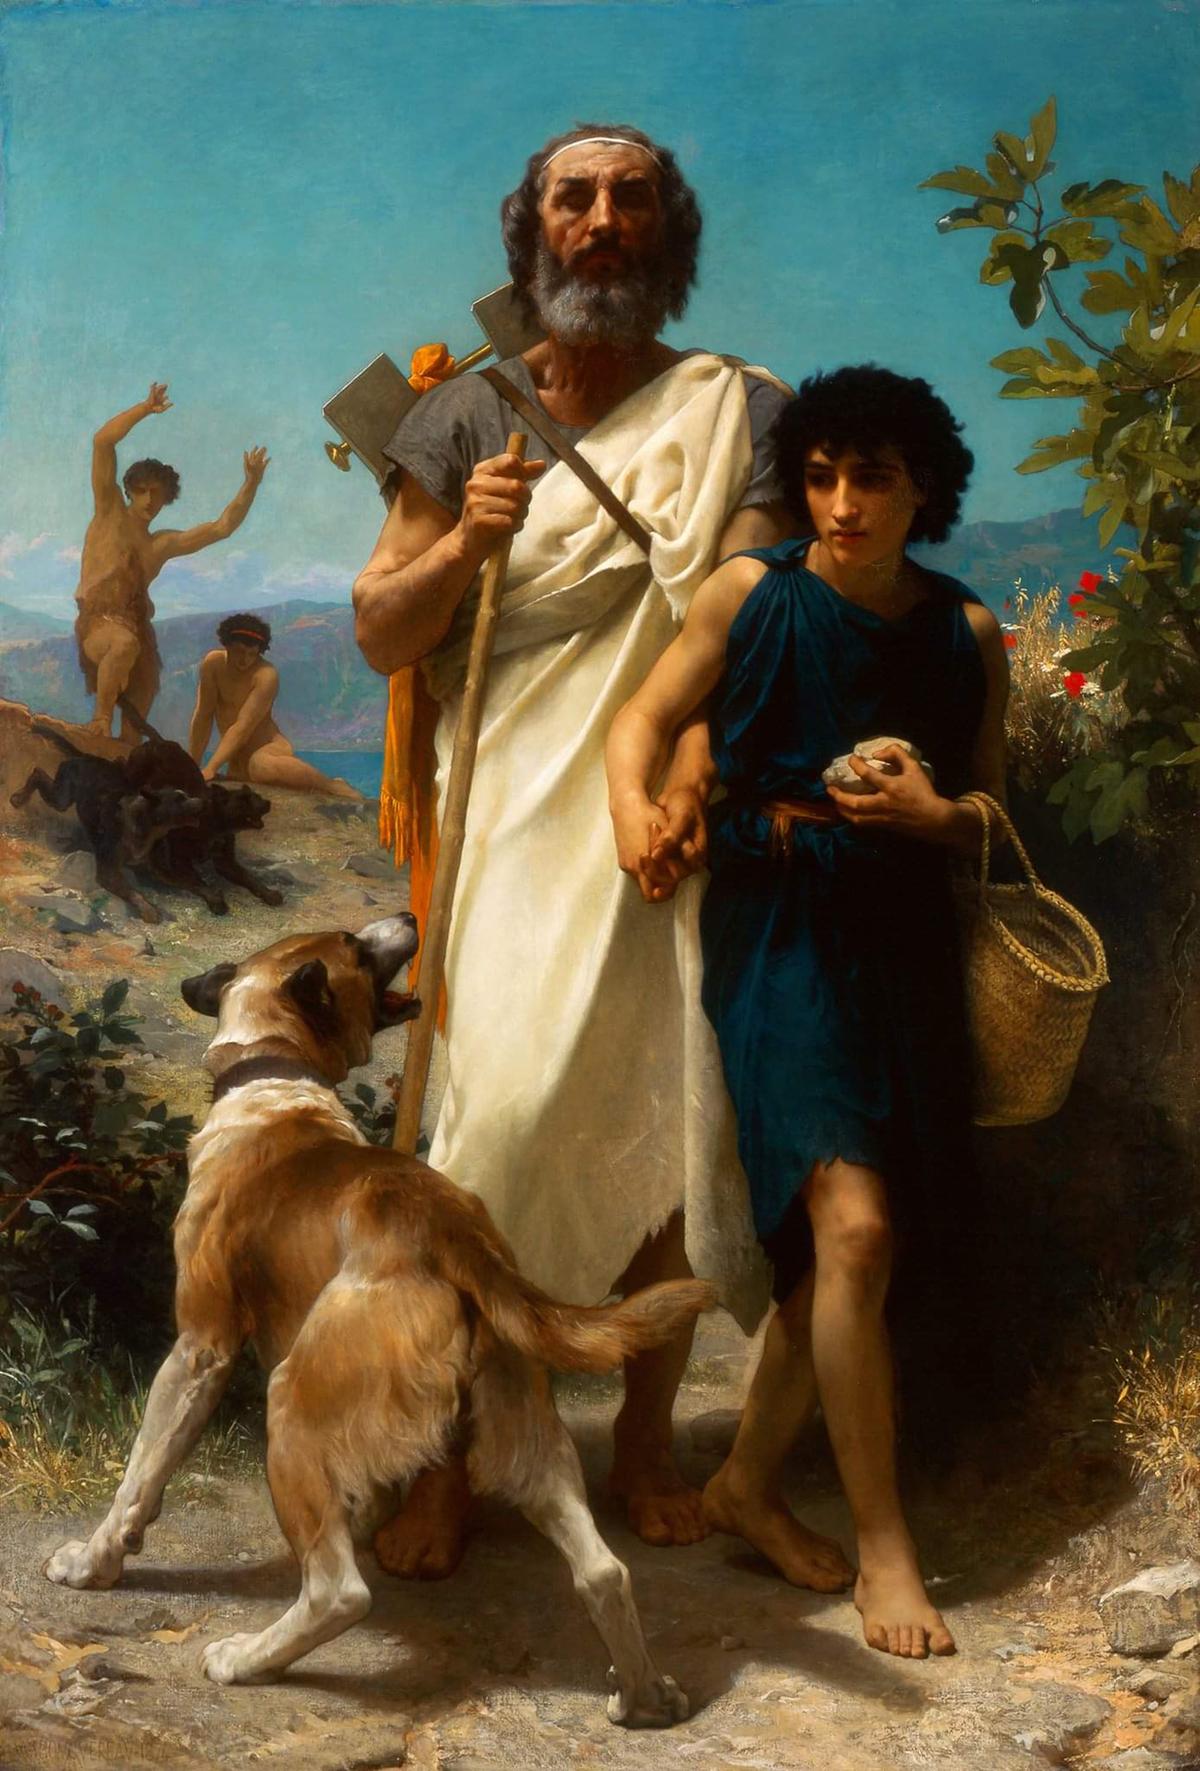 "Homer and His Guide," 1874, by William-Adolphe Bouguereau. Oil on canvas; 82.25 inches by 56.25 inches. Gift of Frederick Layton, Milwaukee Art Museum. (<a href="https://mam.org/info/pressroom/press-kits/archives/bouguereau-america/">John R. Glembin</a>/Milwaukee Art Museum)